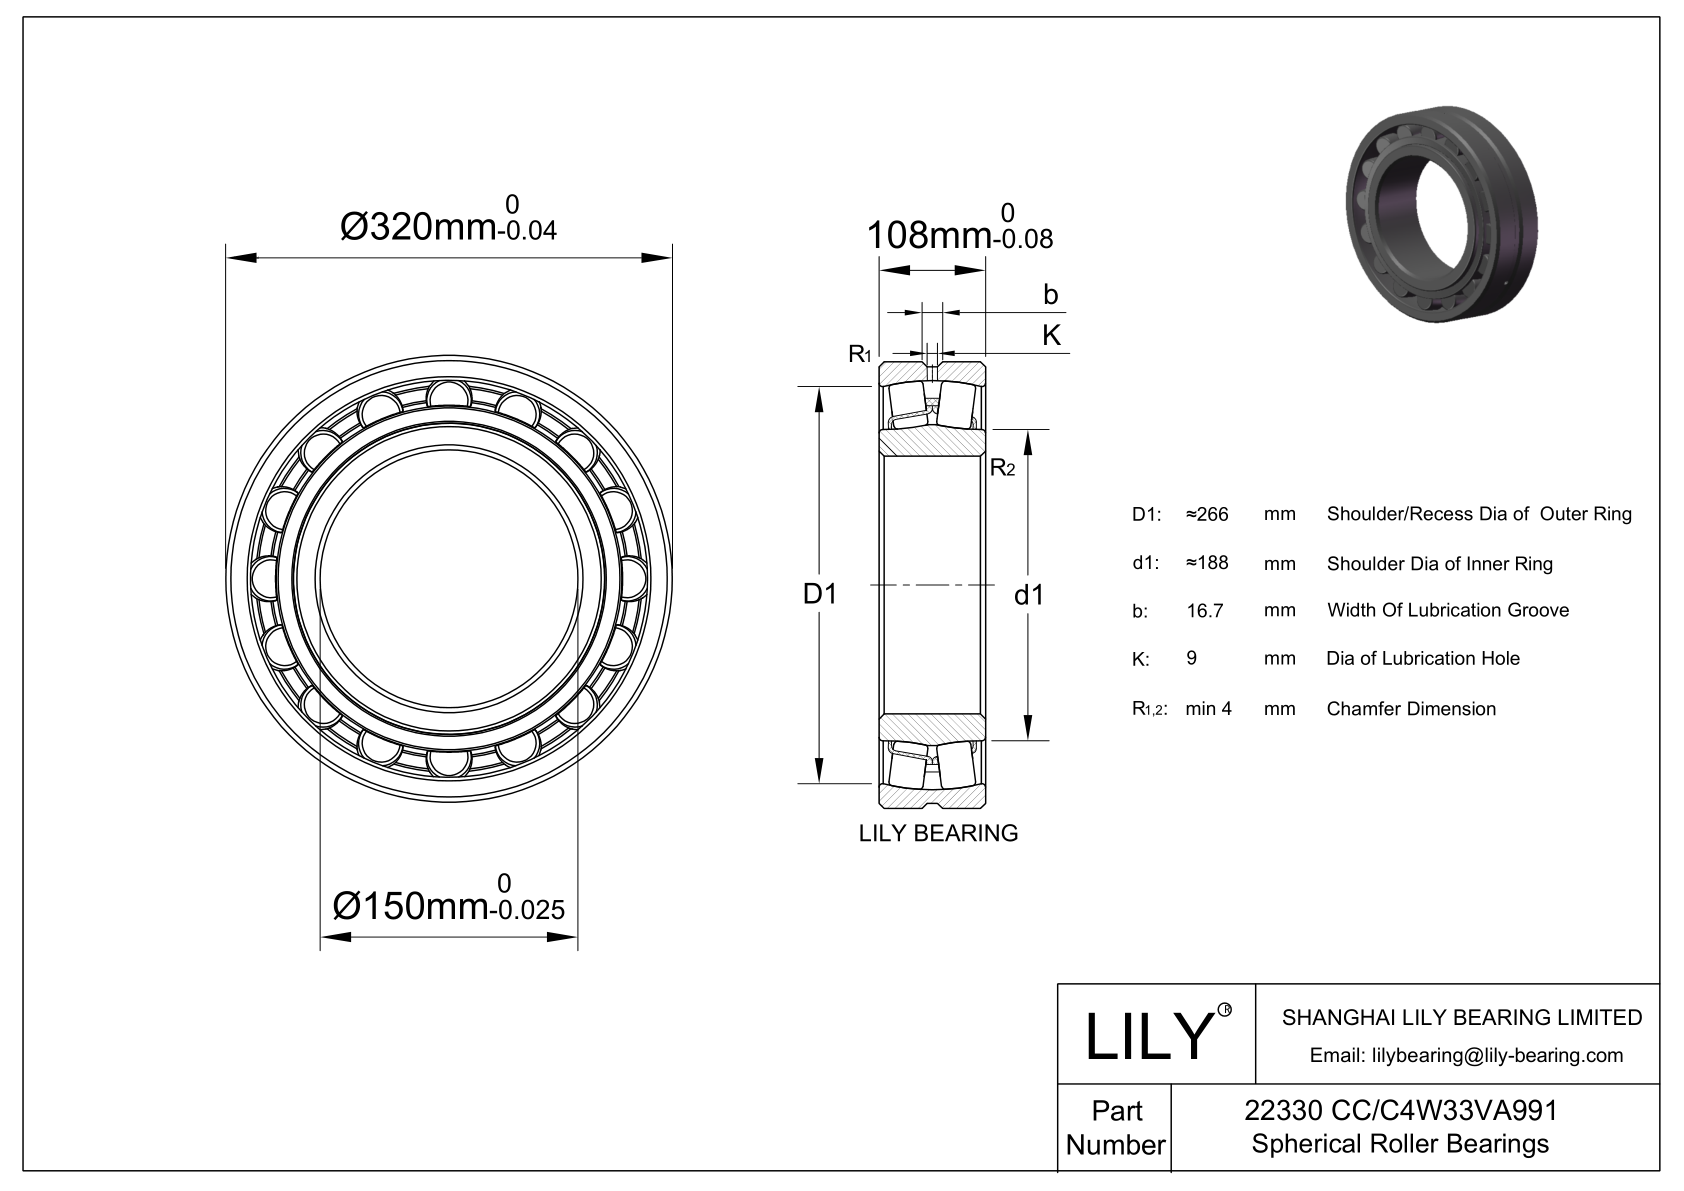 22330 CC/C4W33VA991 Double Row Spherical Roller Bearing cad drawing